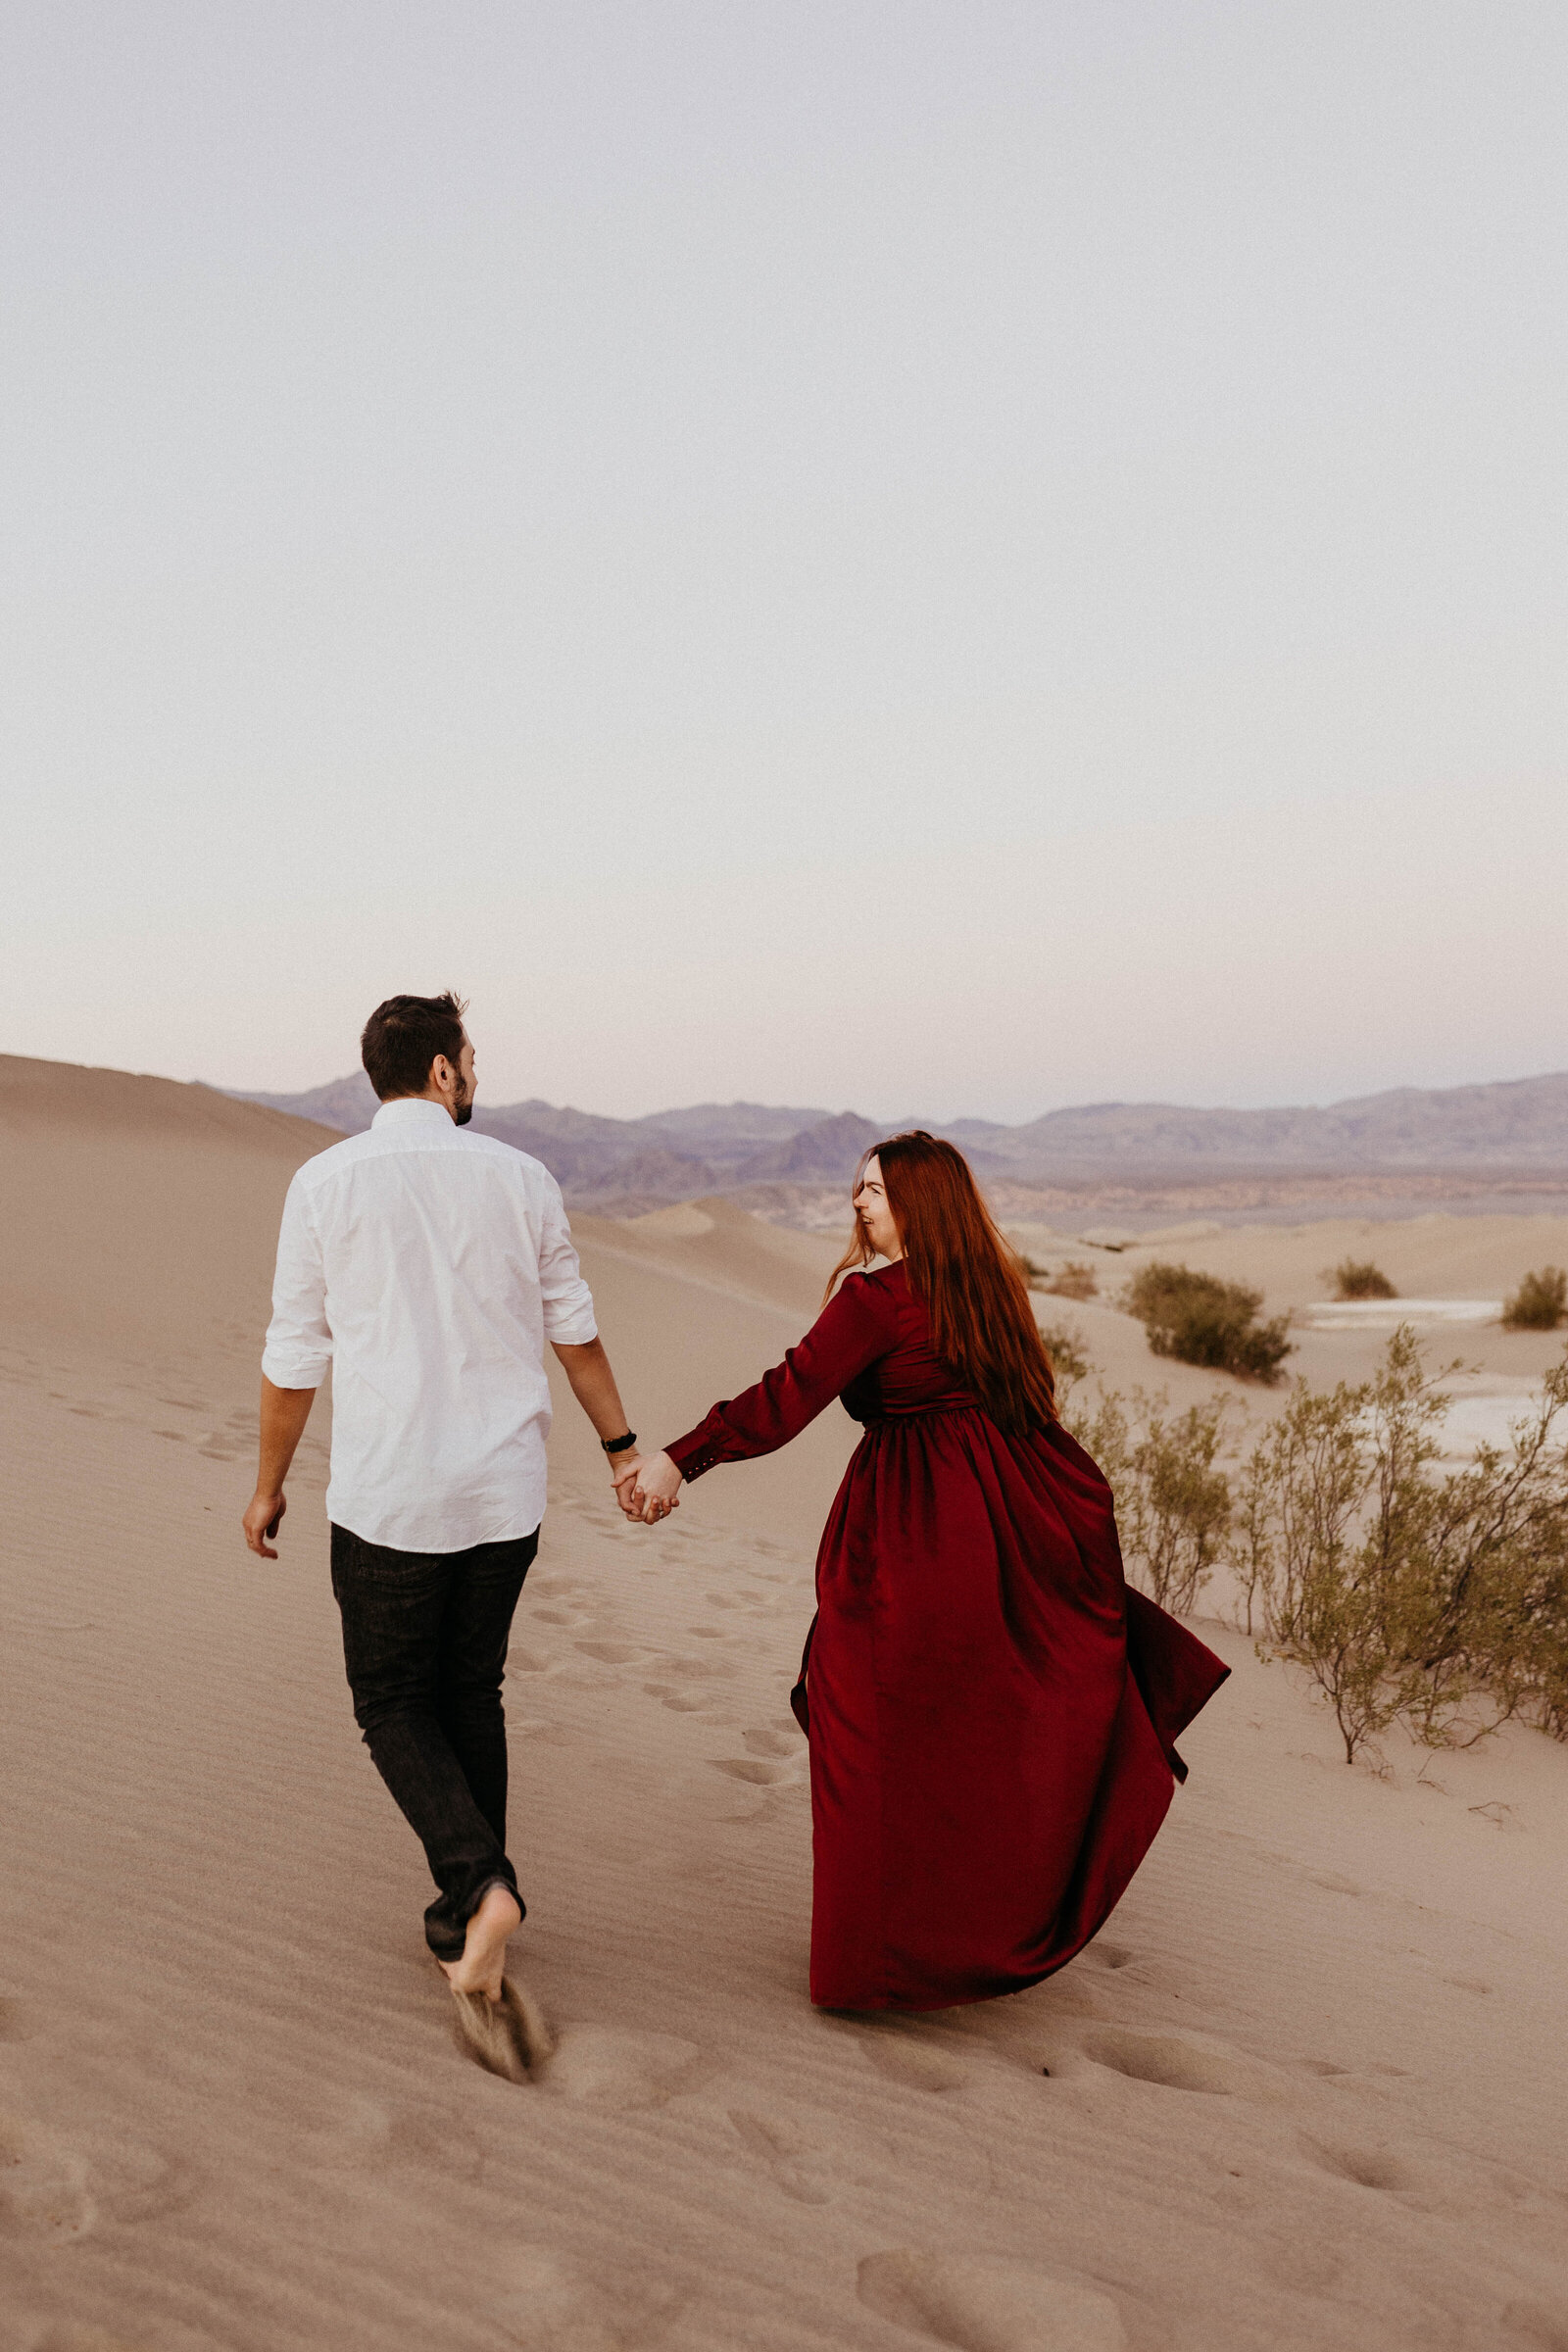 C&R | Death Valley Couples Session | Katelyn Faye Photography (77 of 132)